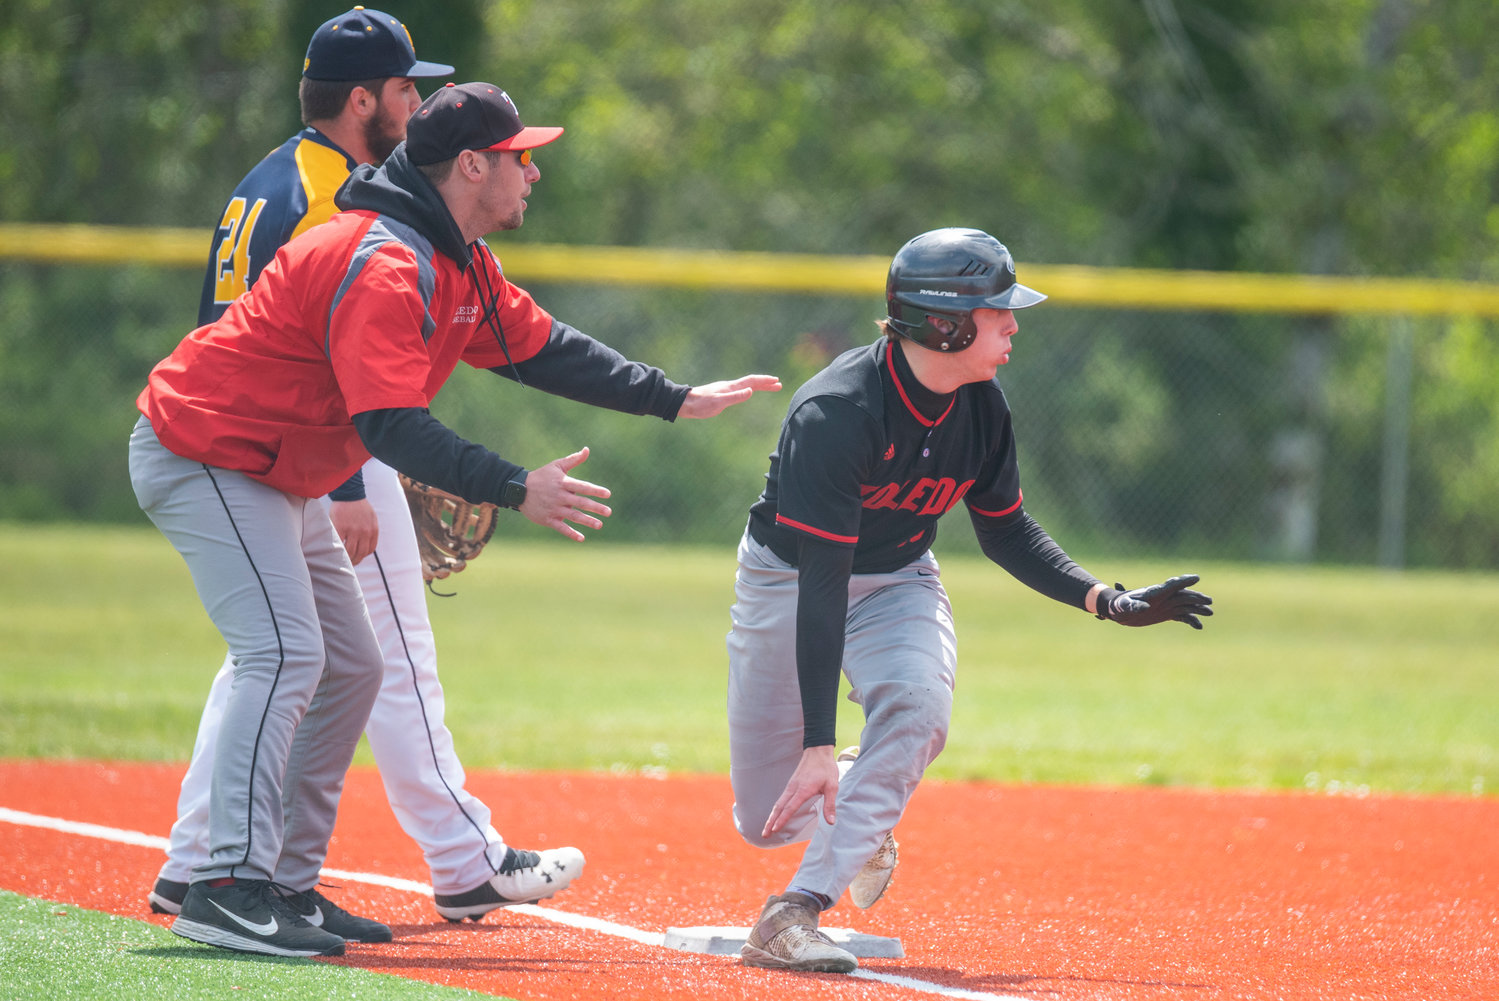 Toledo baserunner Geoffrey Glass, right, watches toward second base and contemplates sprinting home during a playoff win over Ilwaco on May 7.